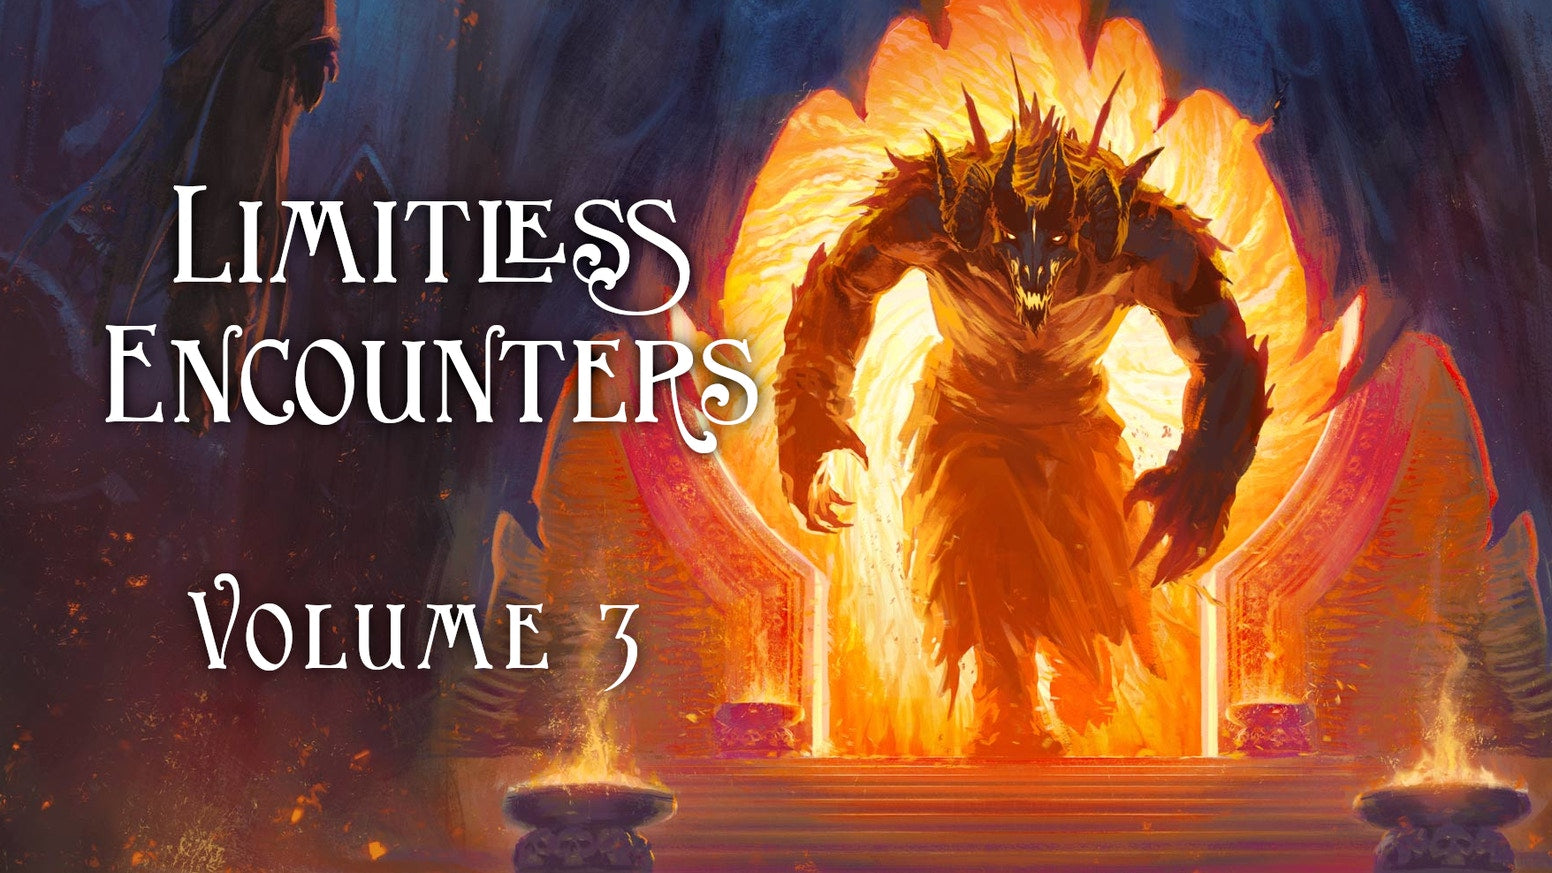 5E: Limitless Encounters Vol 3 by Limitless Adventures (Soft Cover) | All About Games